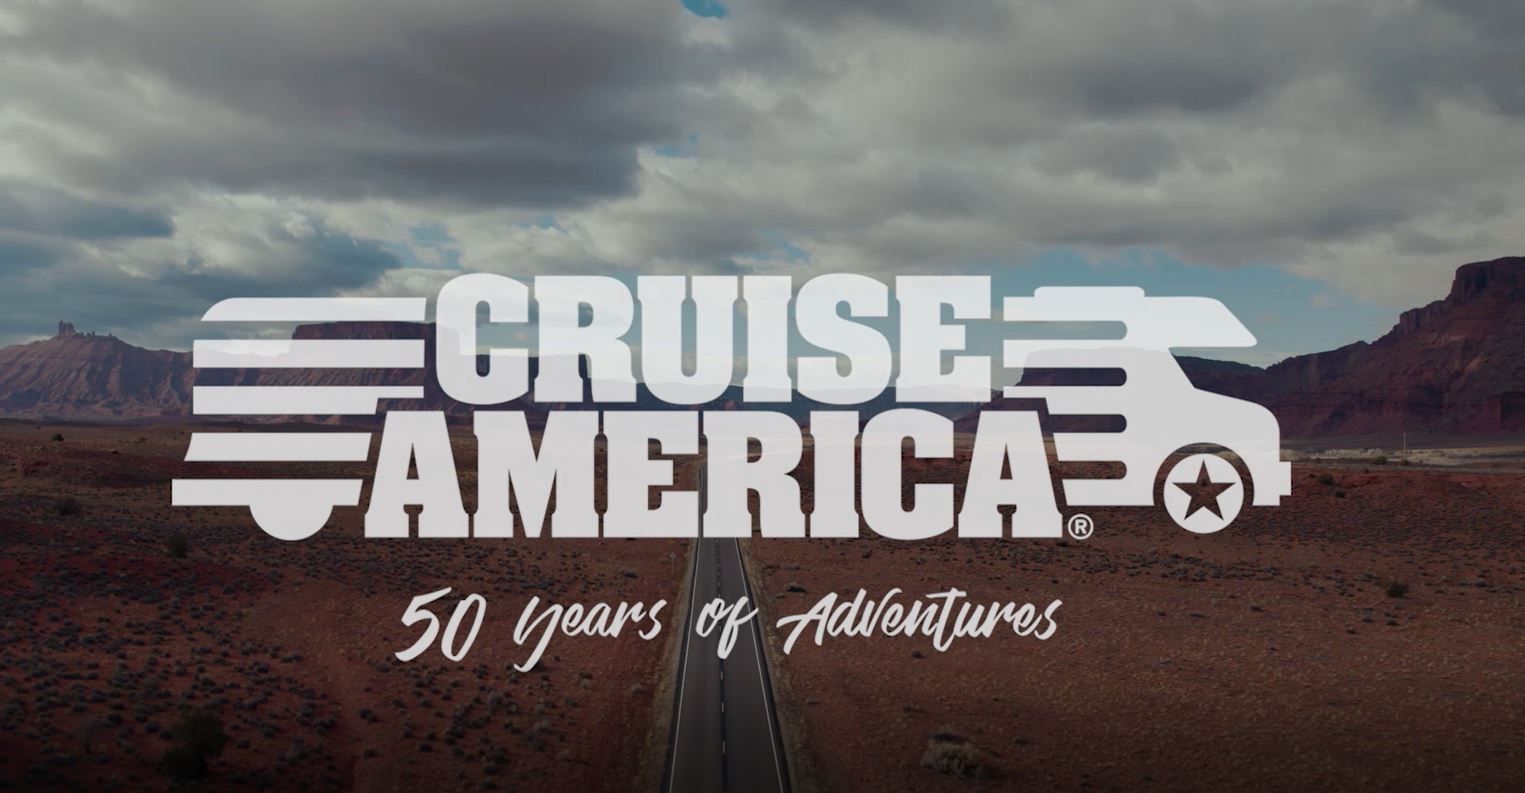 50 Years and Counting for Cruise America